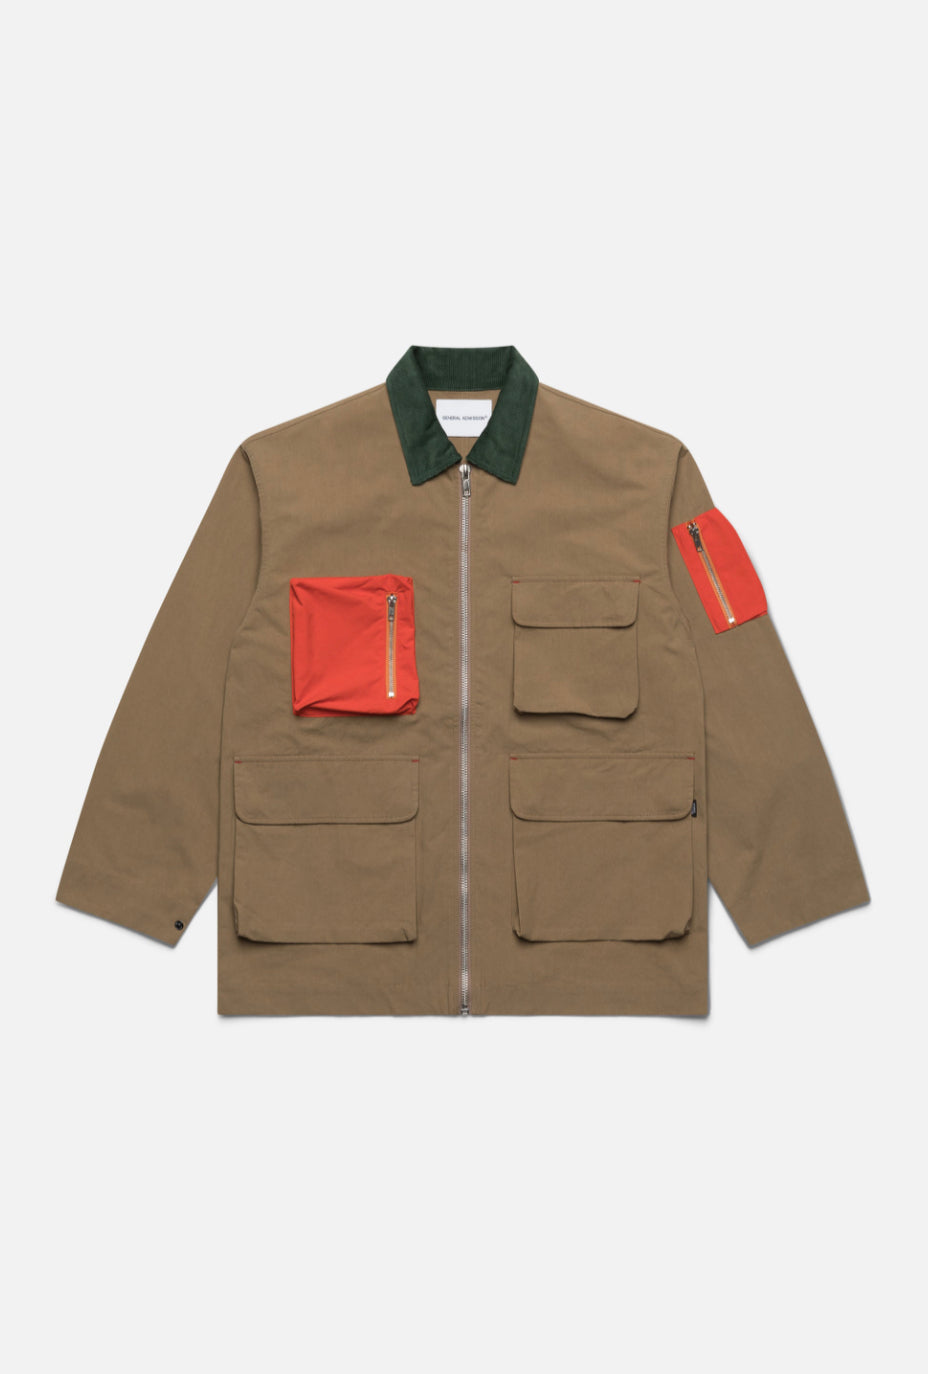 General Admission - GENERAL ADMISSION HUNTING JACKET IN KHAKI - Rent With Thred